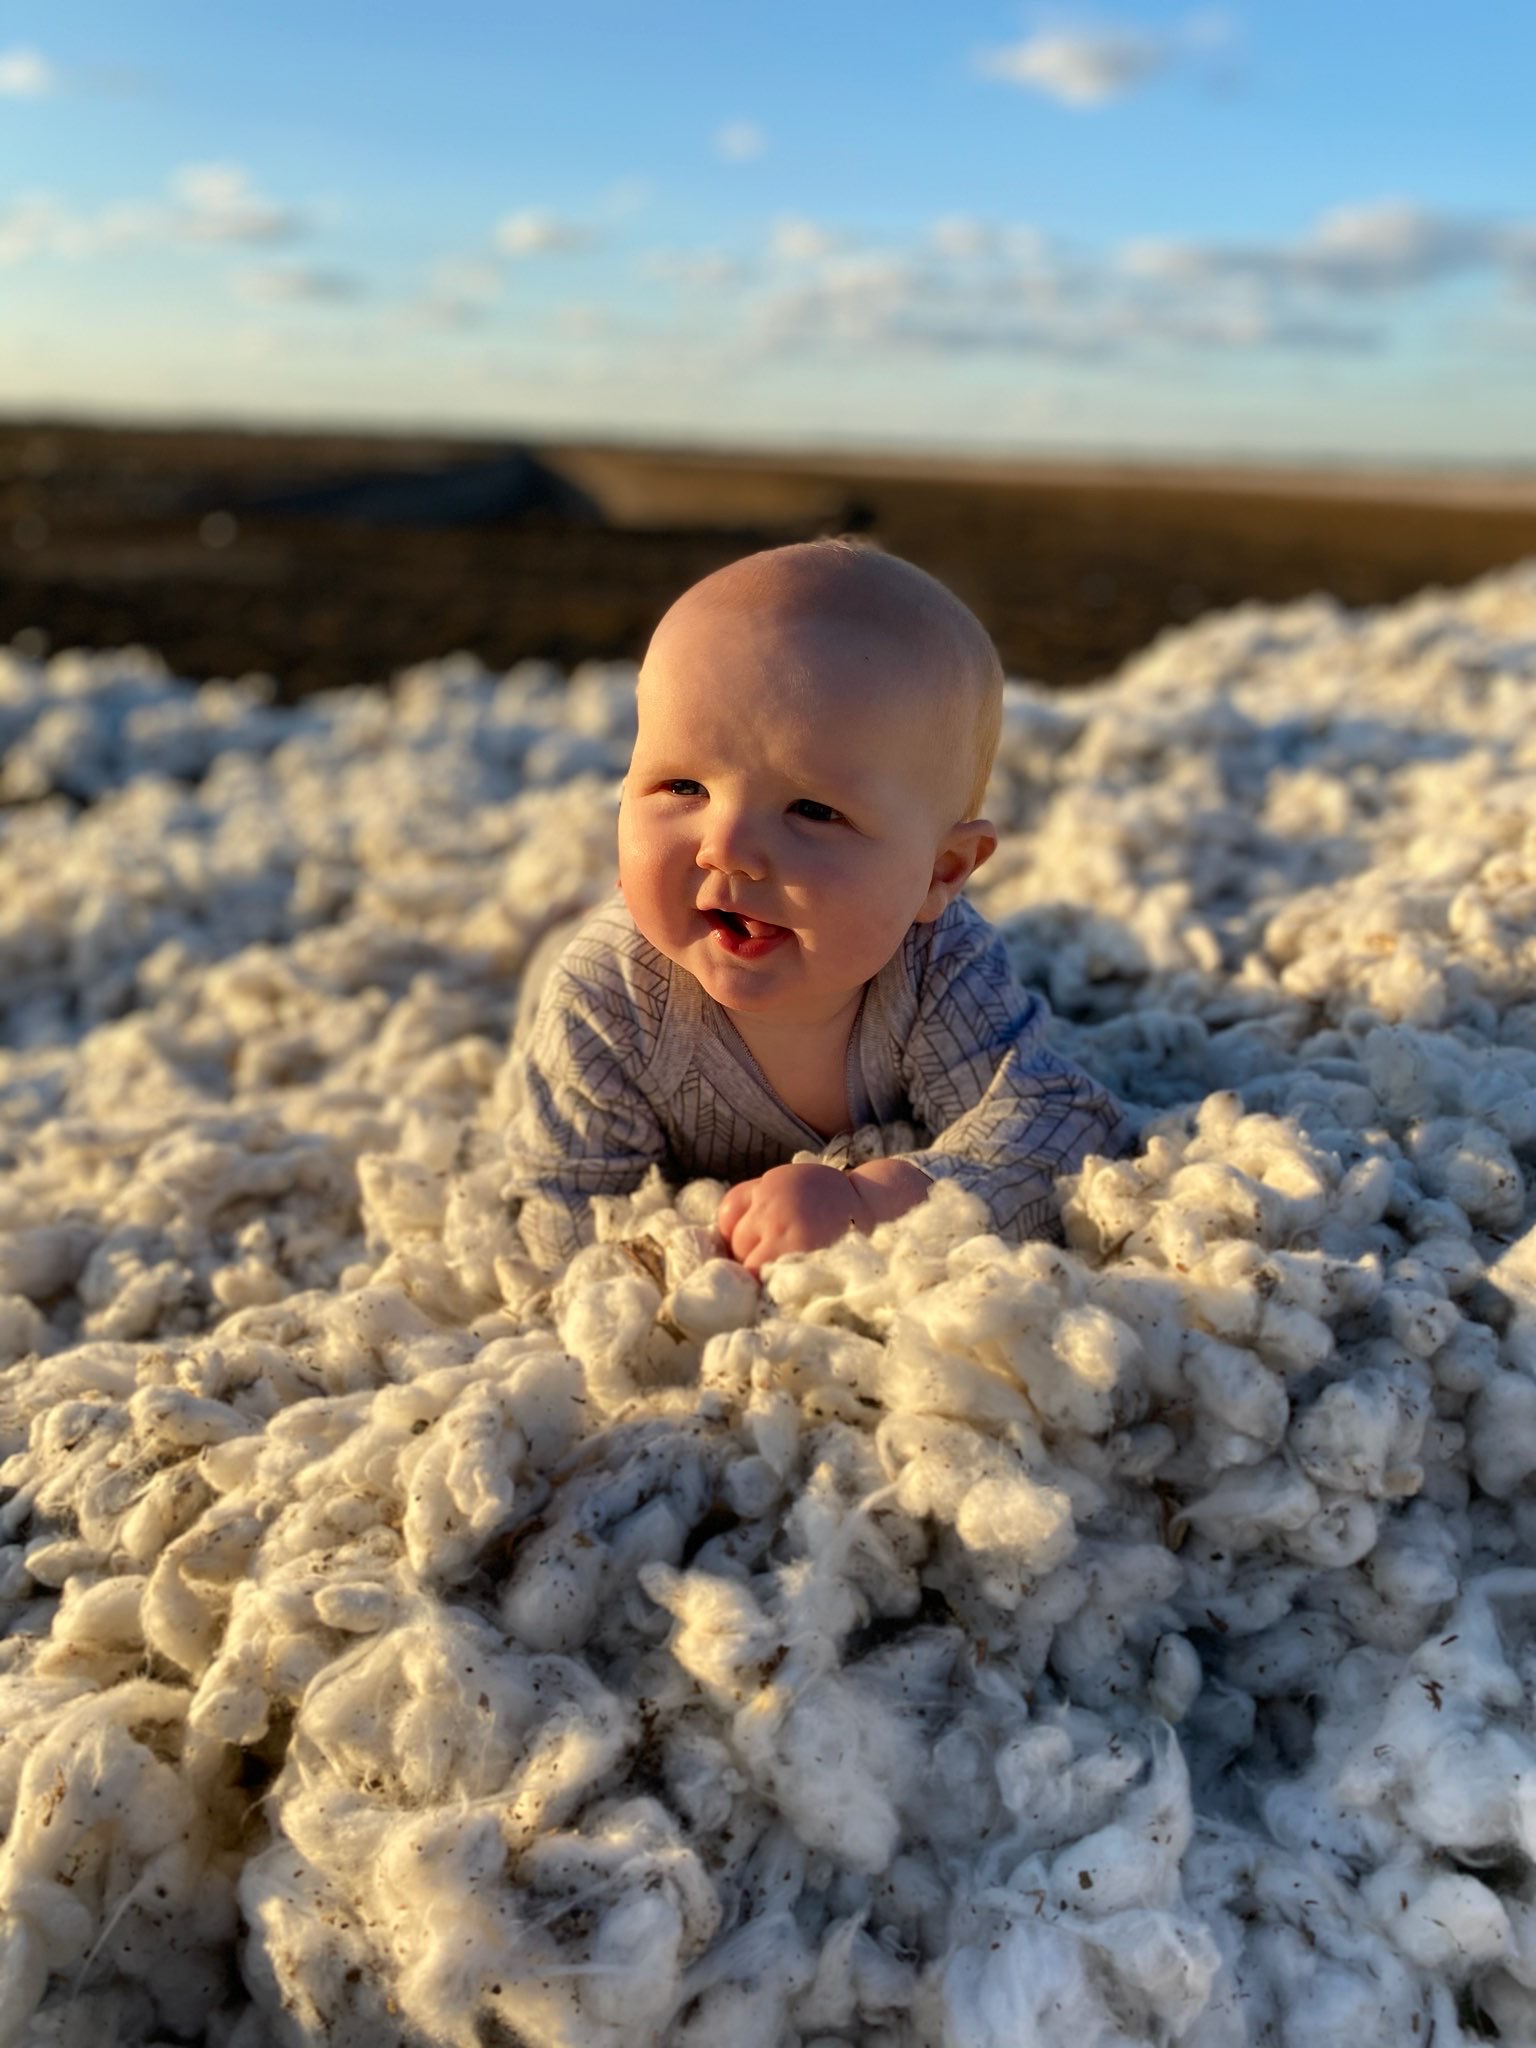 Ben and Jess Swansbra’s son Otis playing in the cotton.